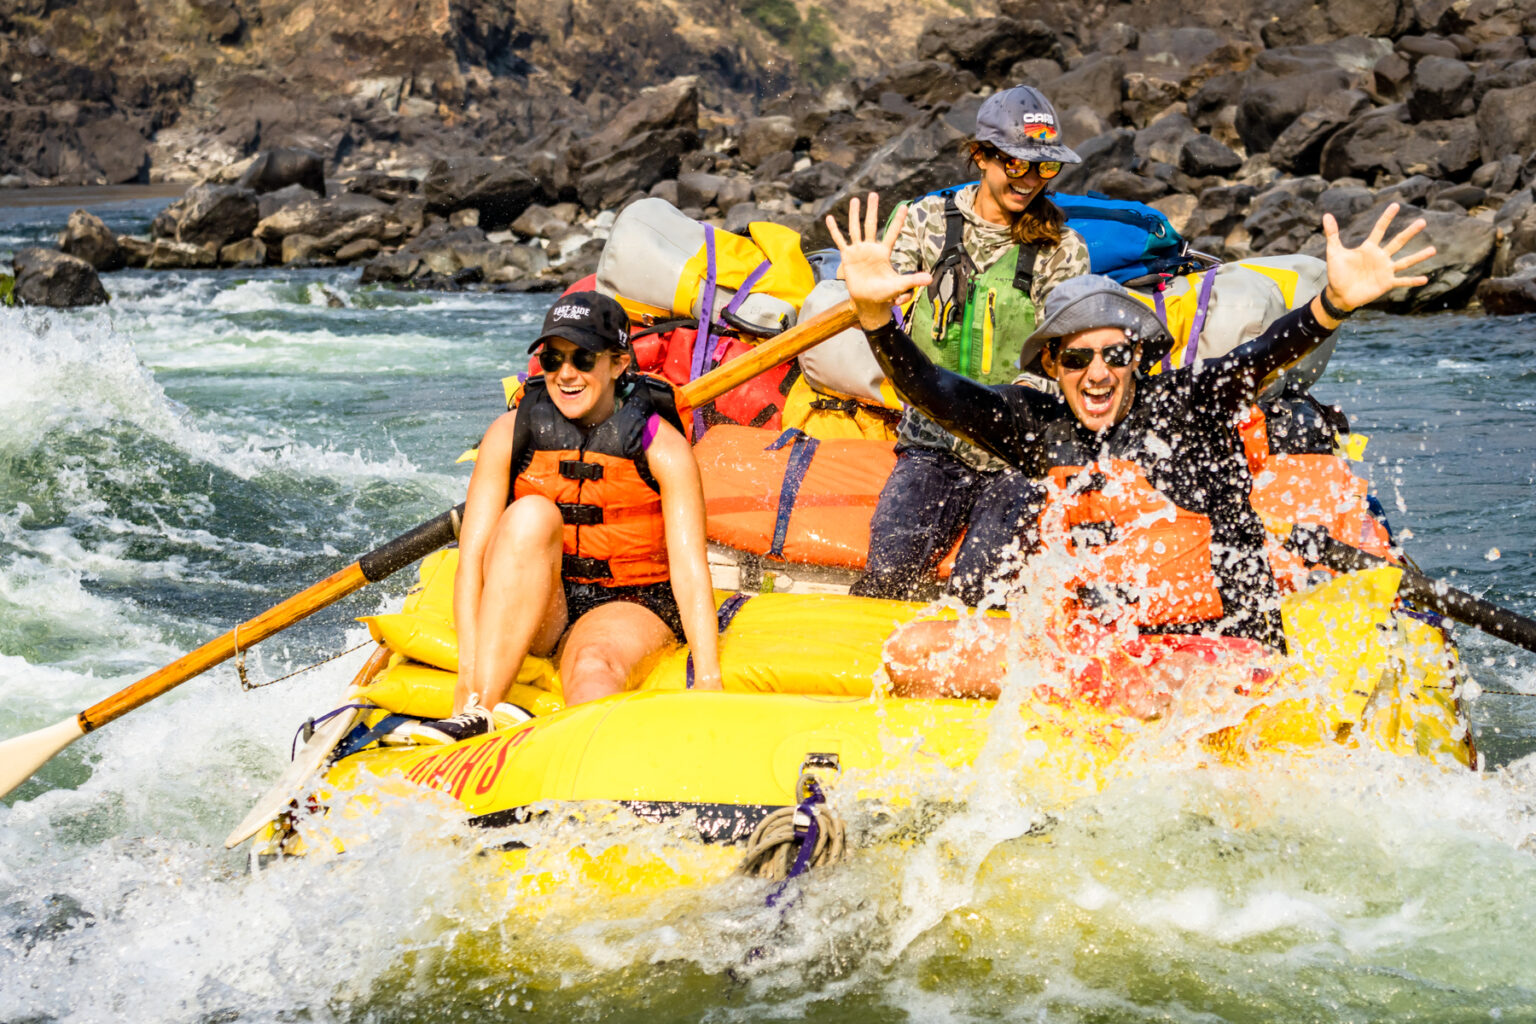 Three people in a yellow raft going through a rapid on the Lower Salmon River with big smiles on their faces.